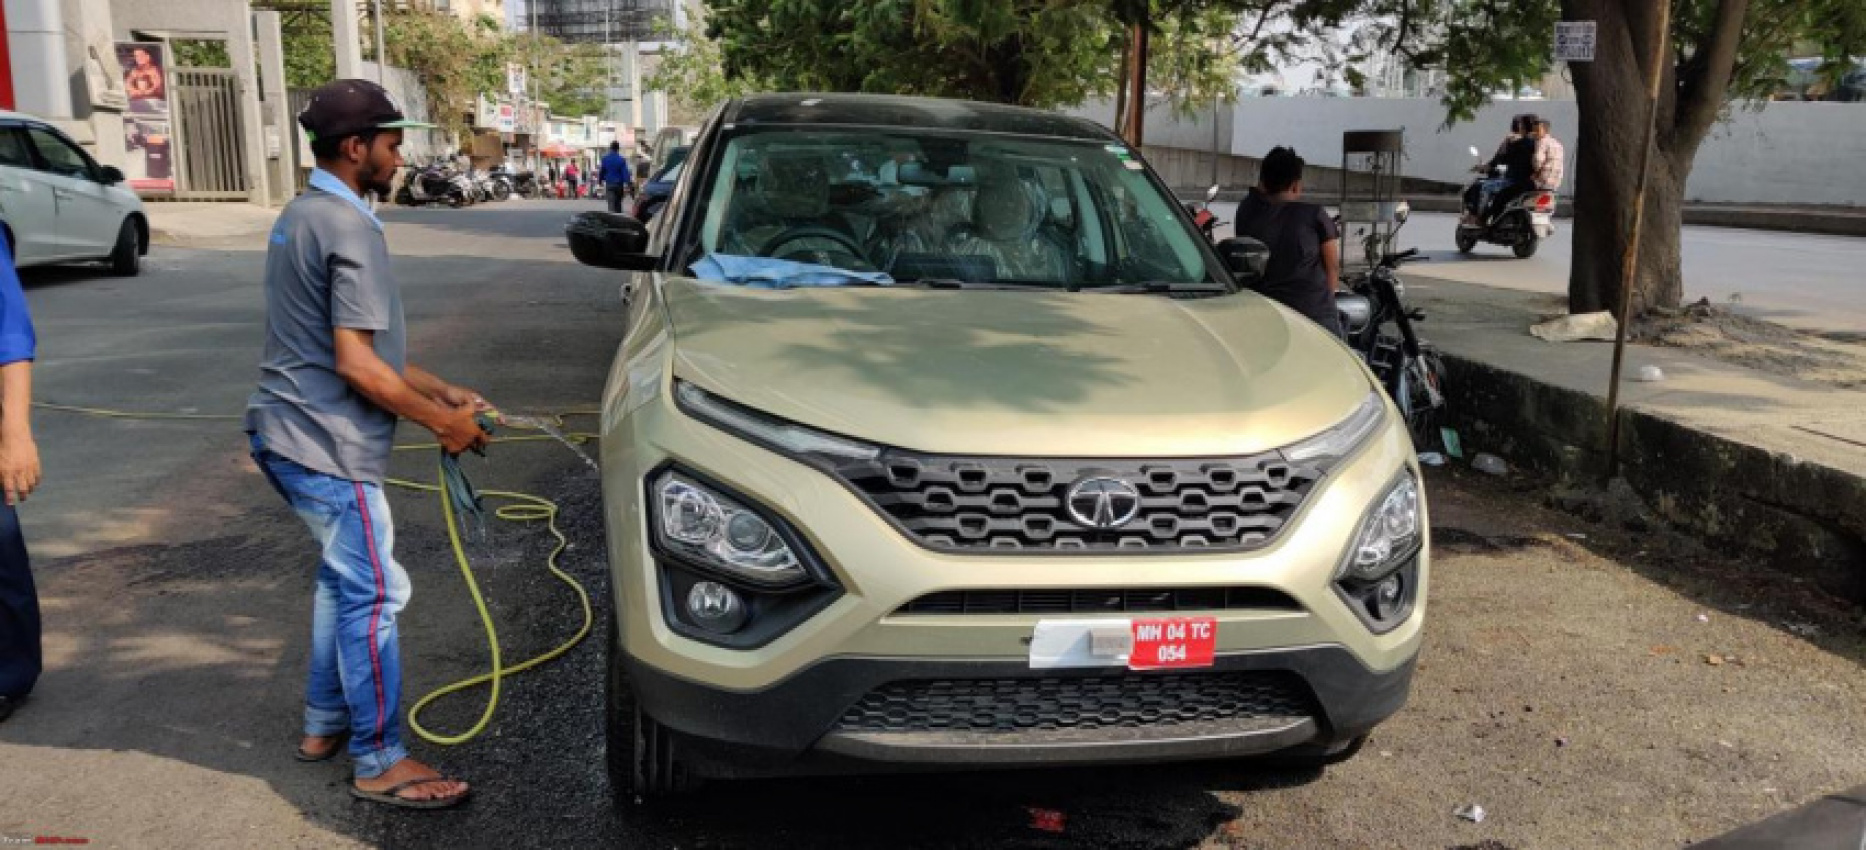 autos, cars, duster, indian, member content, renault duster, tata harrier, how i ended up buying a tata harrier as my old duster awd replacement